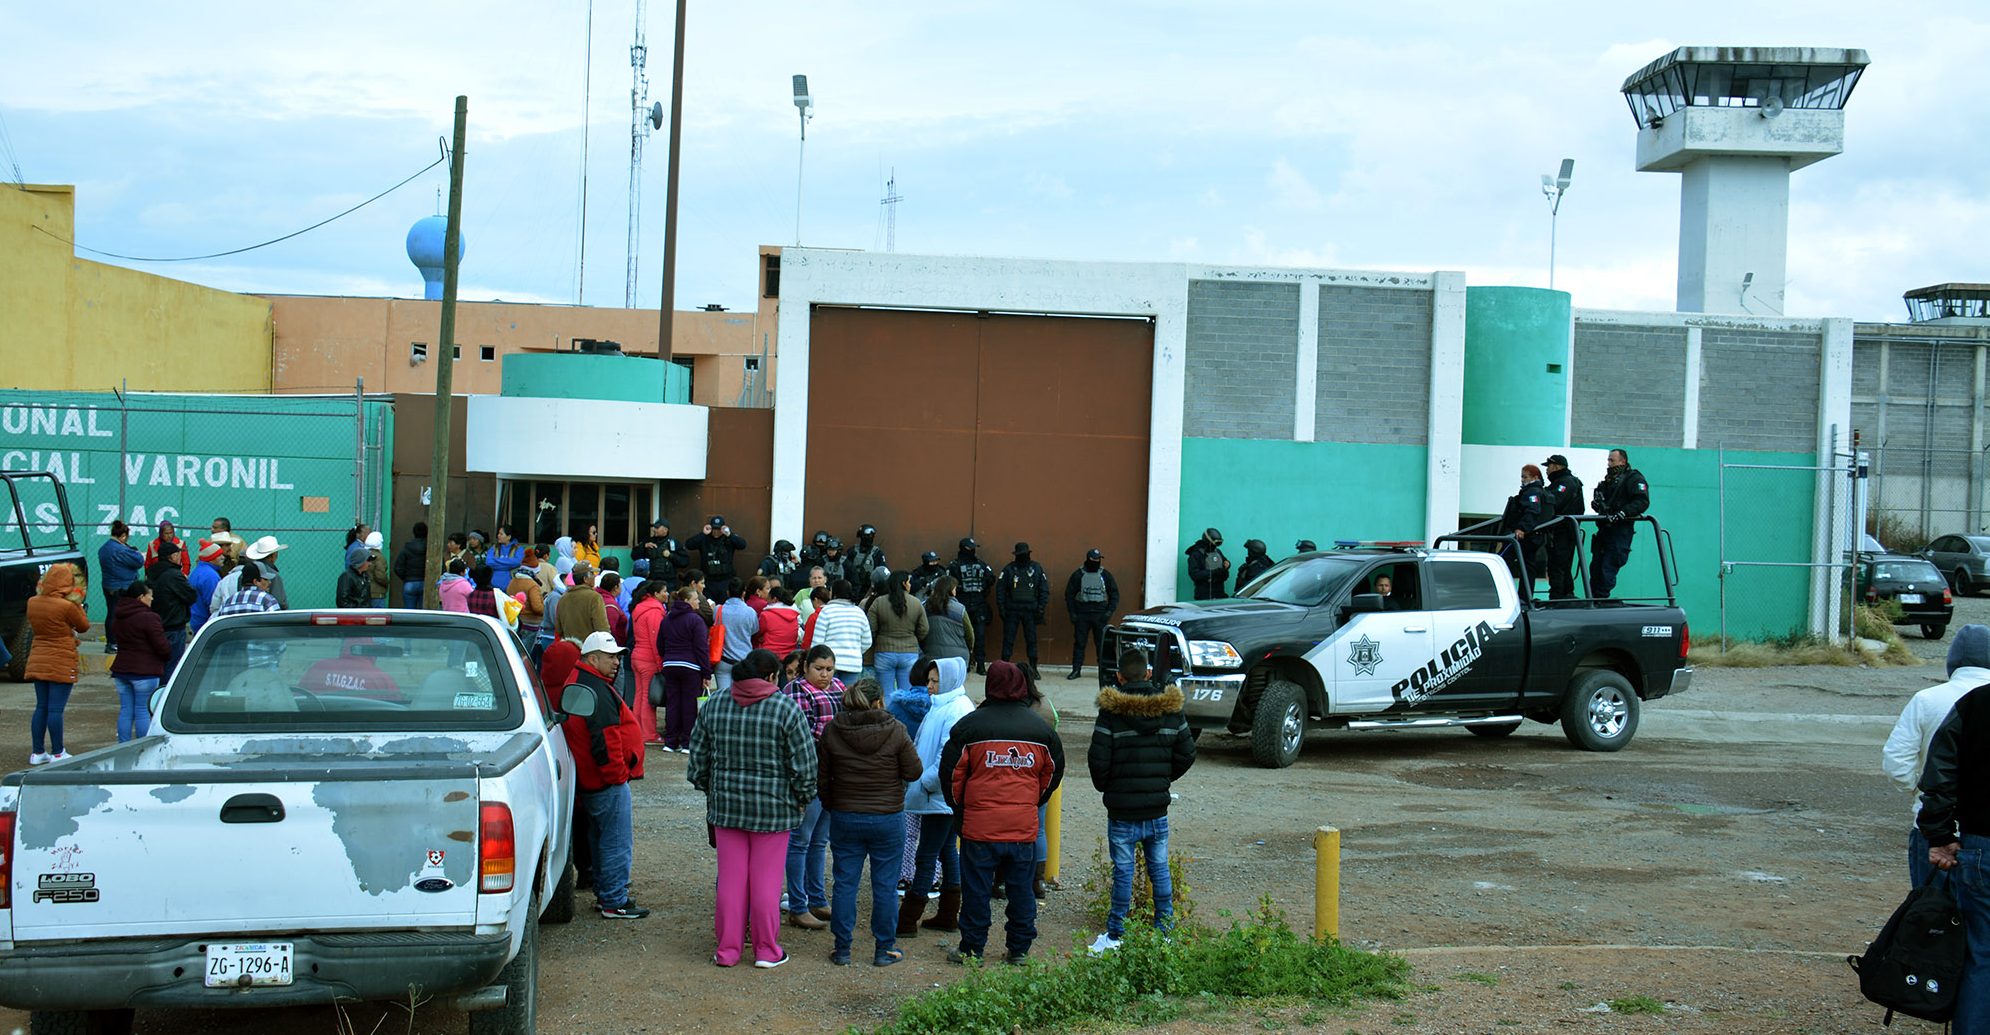 16 inmates die and 5 are injured after feat in Cieneguillas prison